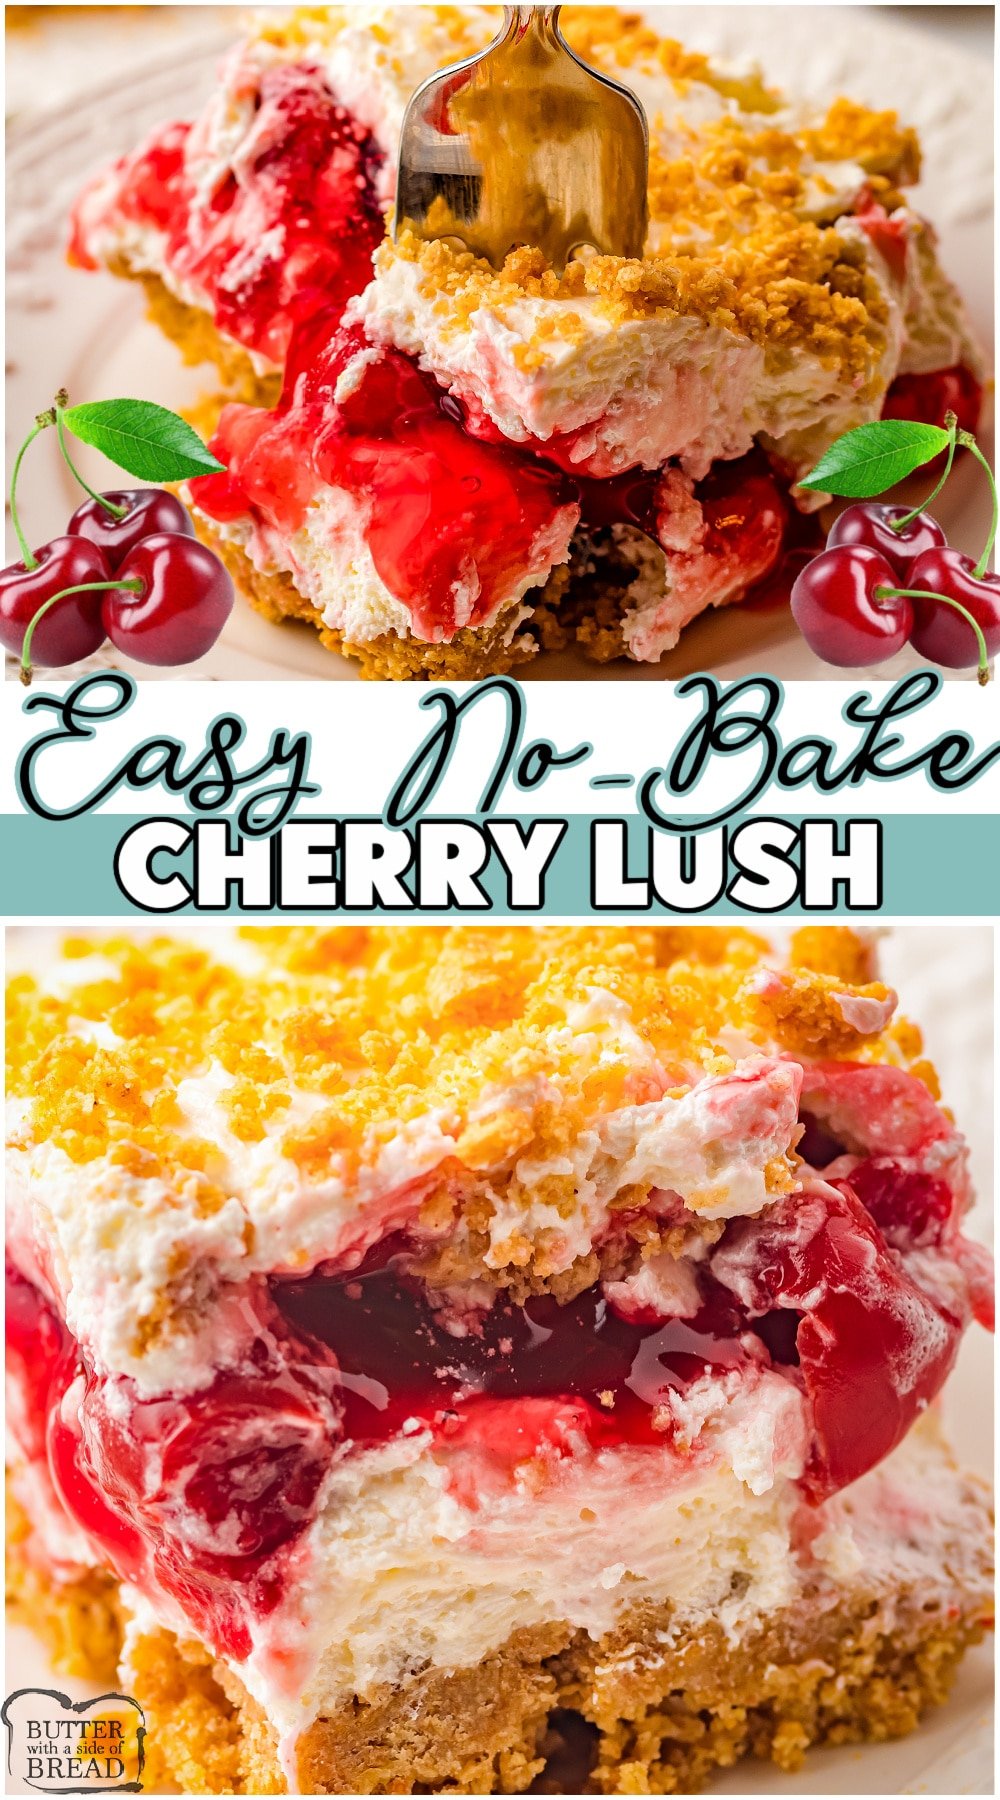 No-Bake Cherry Lush made with cherry pie filling, cream cheese, graham crackers & whipped topping. Simple cherry dessert recipe made in minutes, with layers of cheesecake filling, sweet cherries & creamy topping!  #lush #cherry #dessert #nobake #cherries #easyrecipe from BUTTER WITH A SIDE OF BREAD